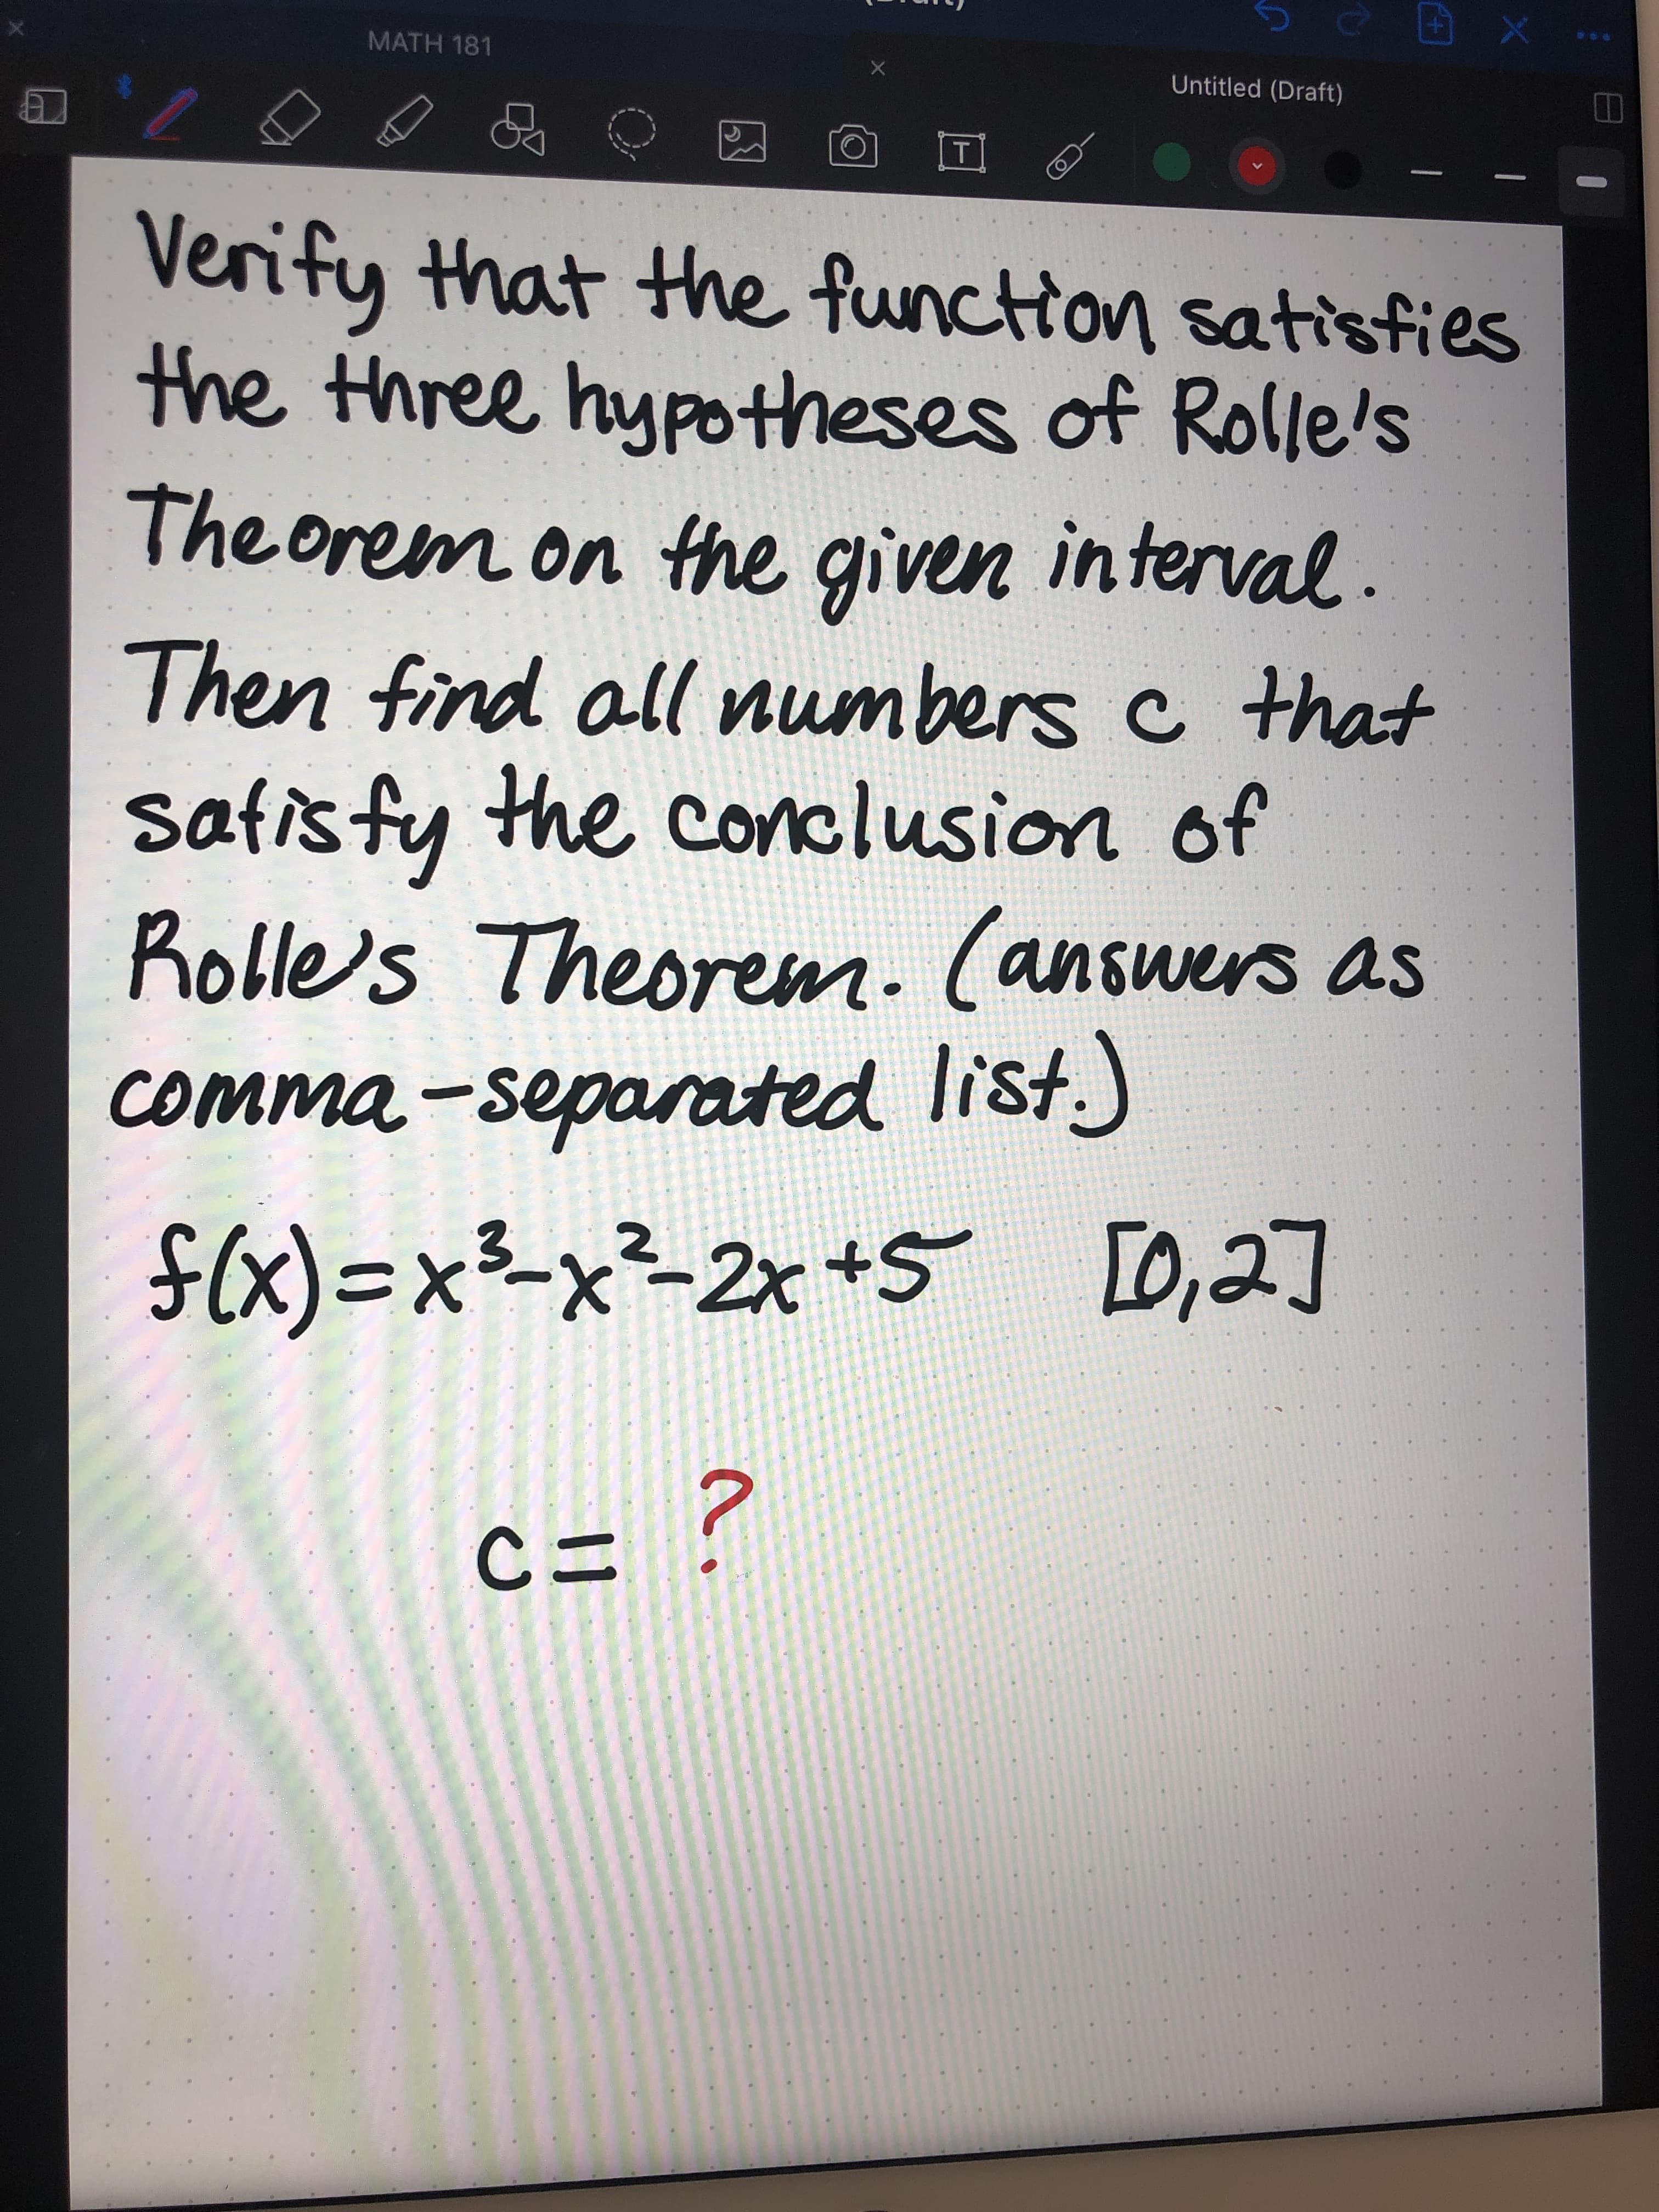 Verify that the function satisfies
the three hypotheses of Rolle's
The orem on Hhe given interval.
Then find all numbers c that
